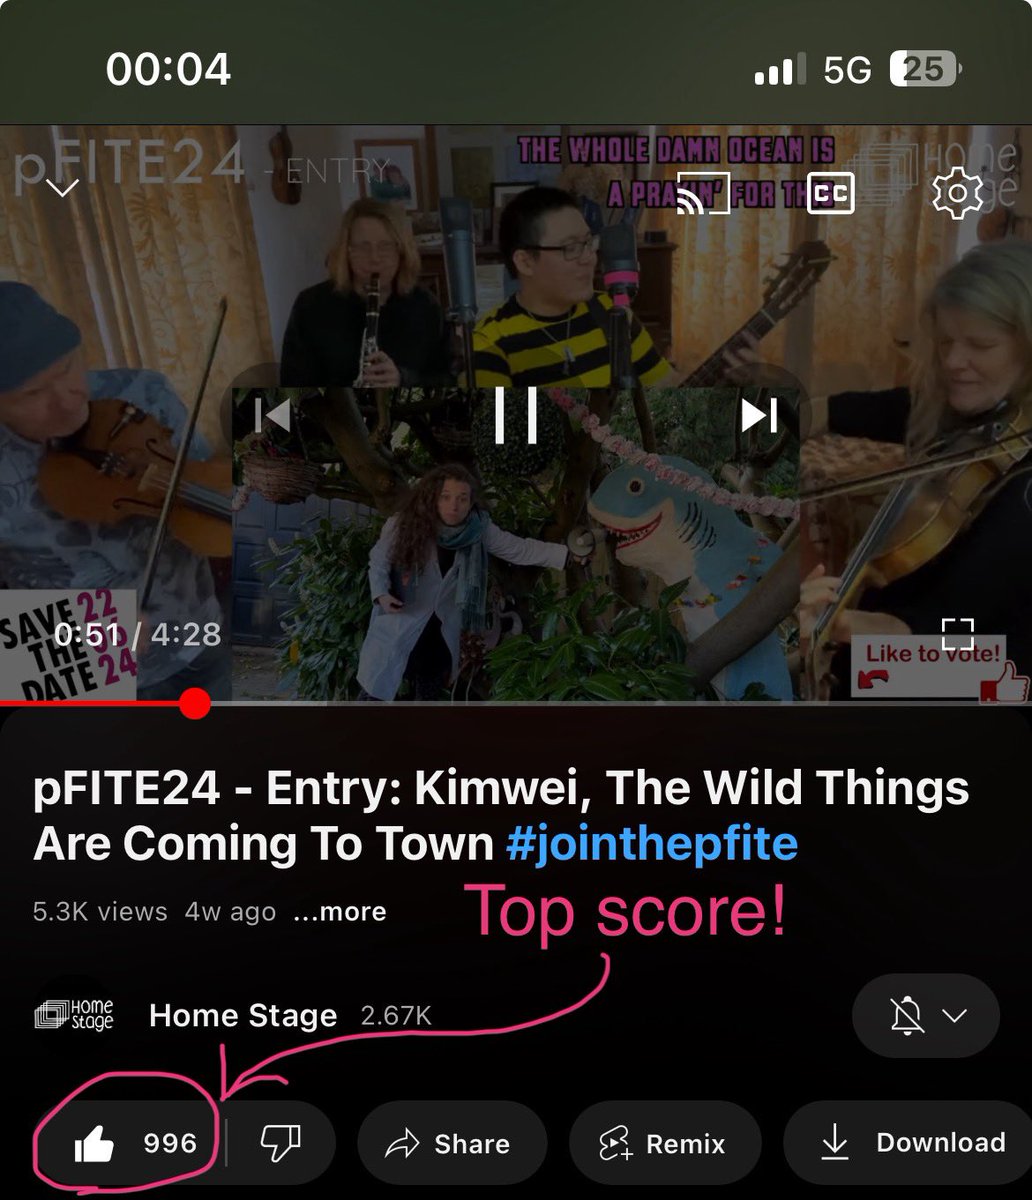 We would have won the pFITE ecosong competition tonight, as we have the most votes (YouTube Likes). However the finish date has been put back to June 30th instead, so we haven’t won but we are still in the lead. Pls Like & share to keep us there! youtu.be/oC_YE8Ipd74?fe…